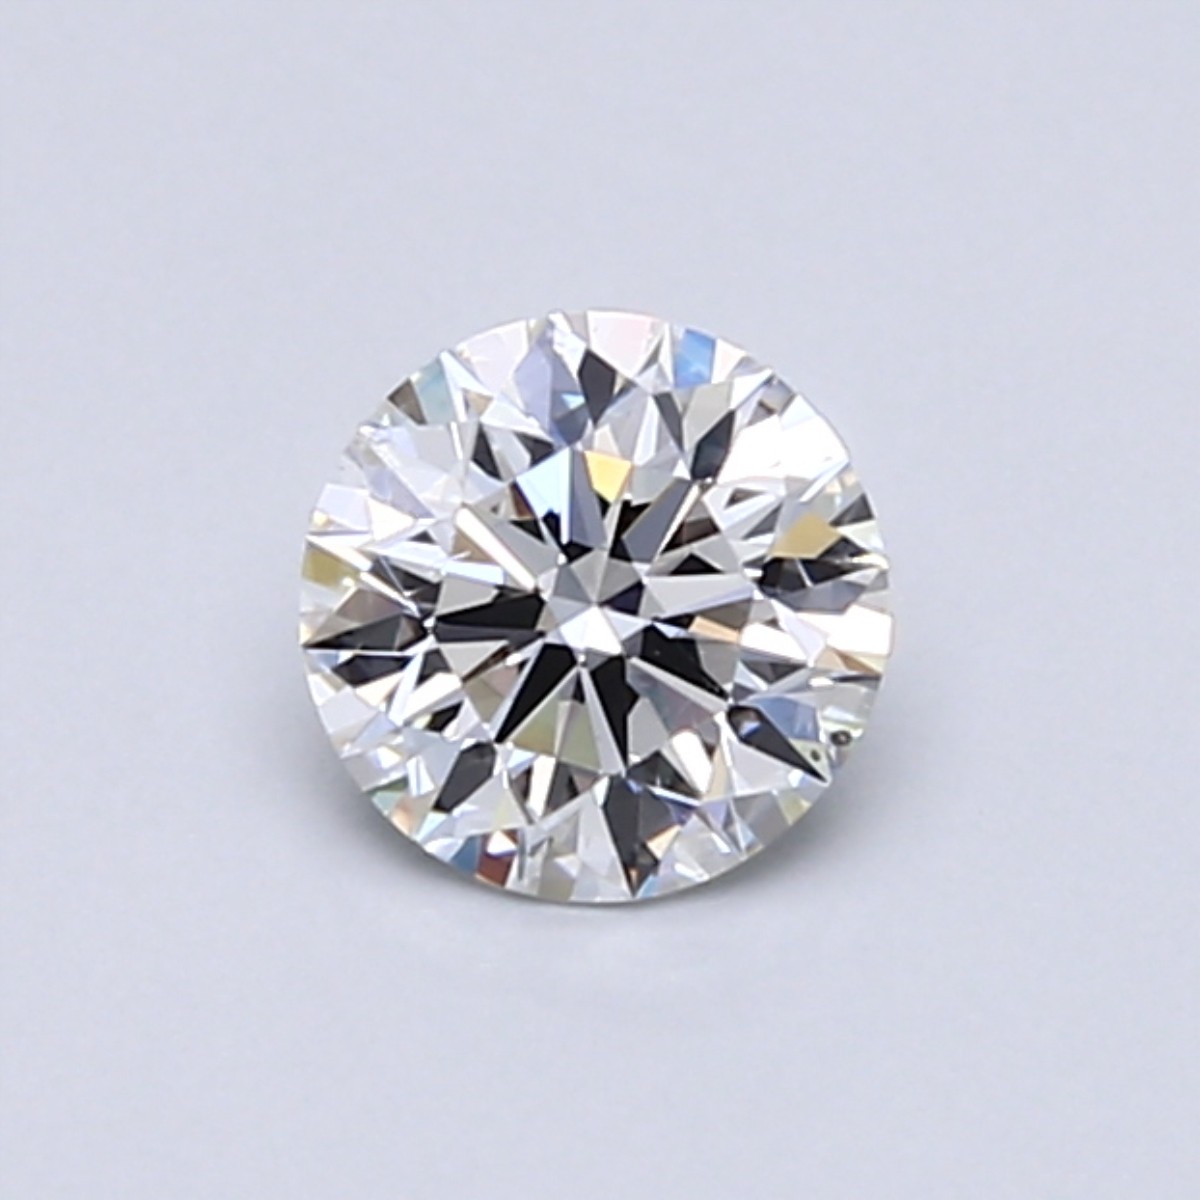 Round 0.57 Carat D Color SI1 Clarity For Sale